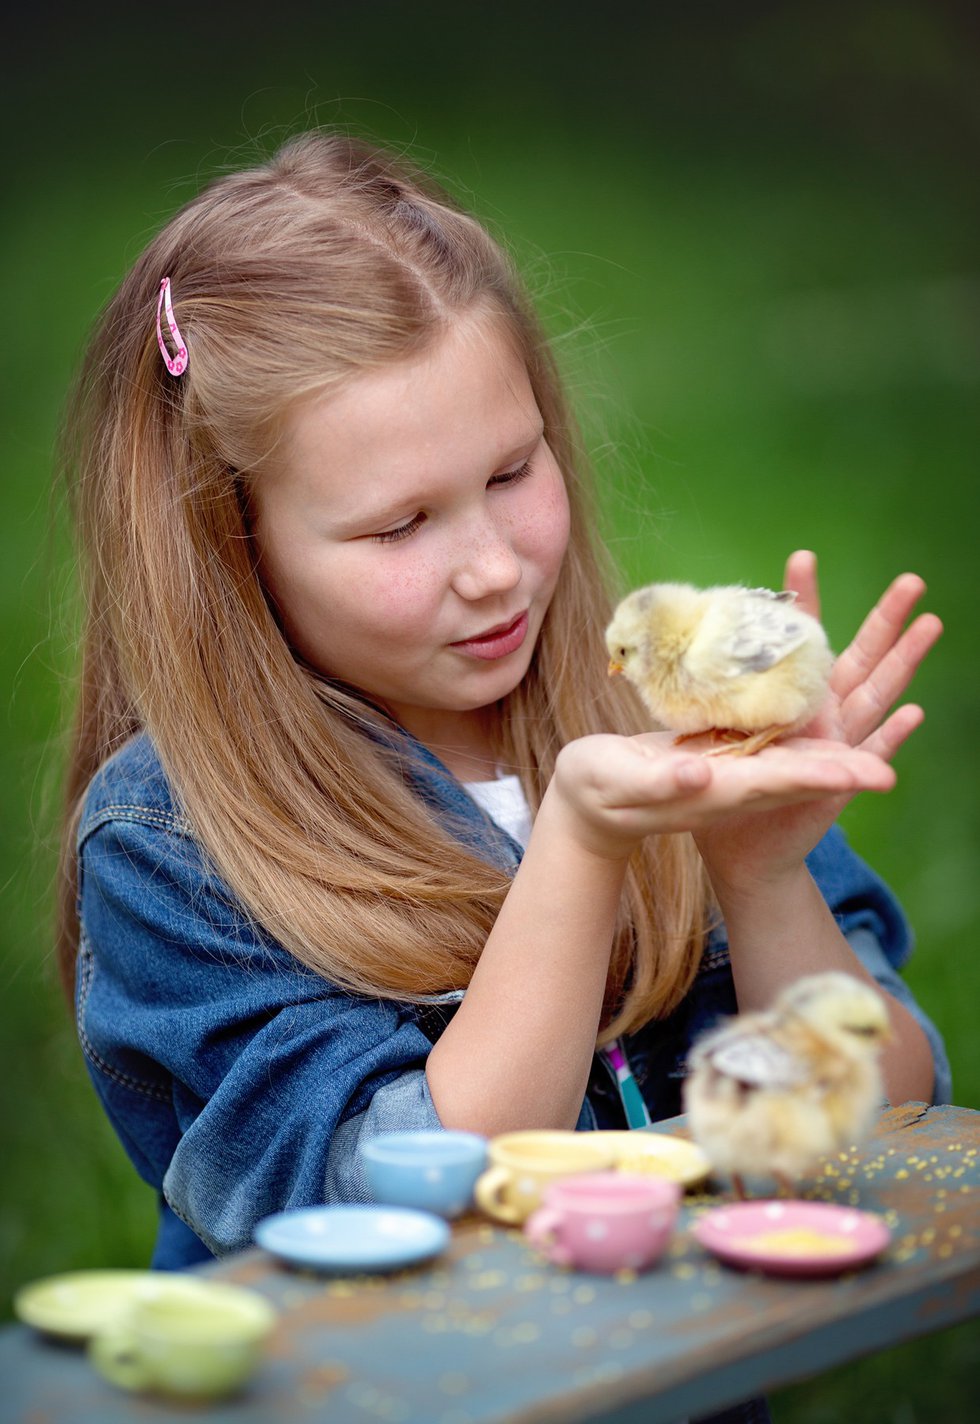 imagesevents27429girl-with-chick-jpg.jpe